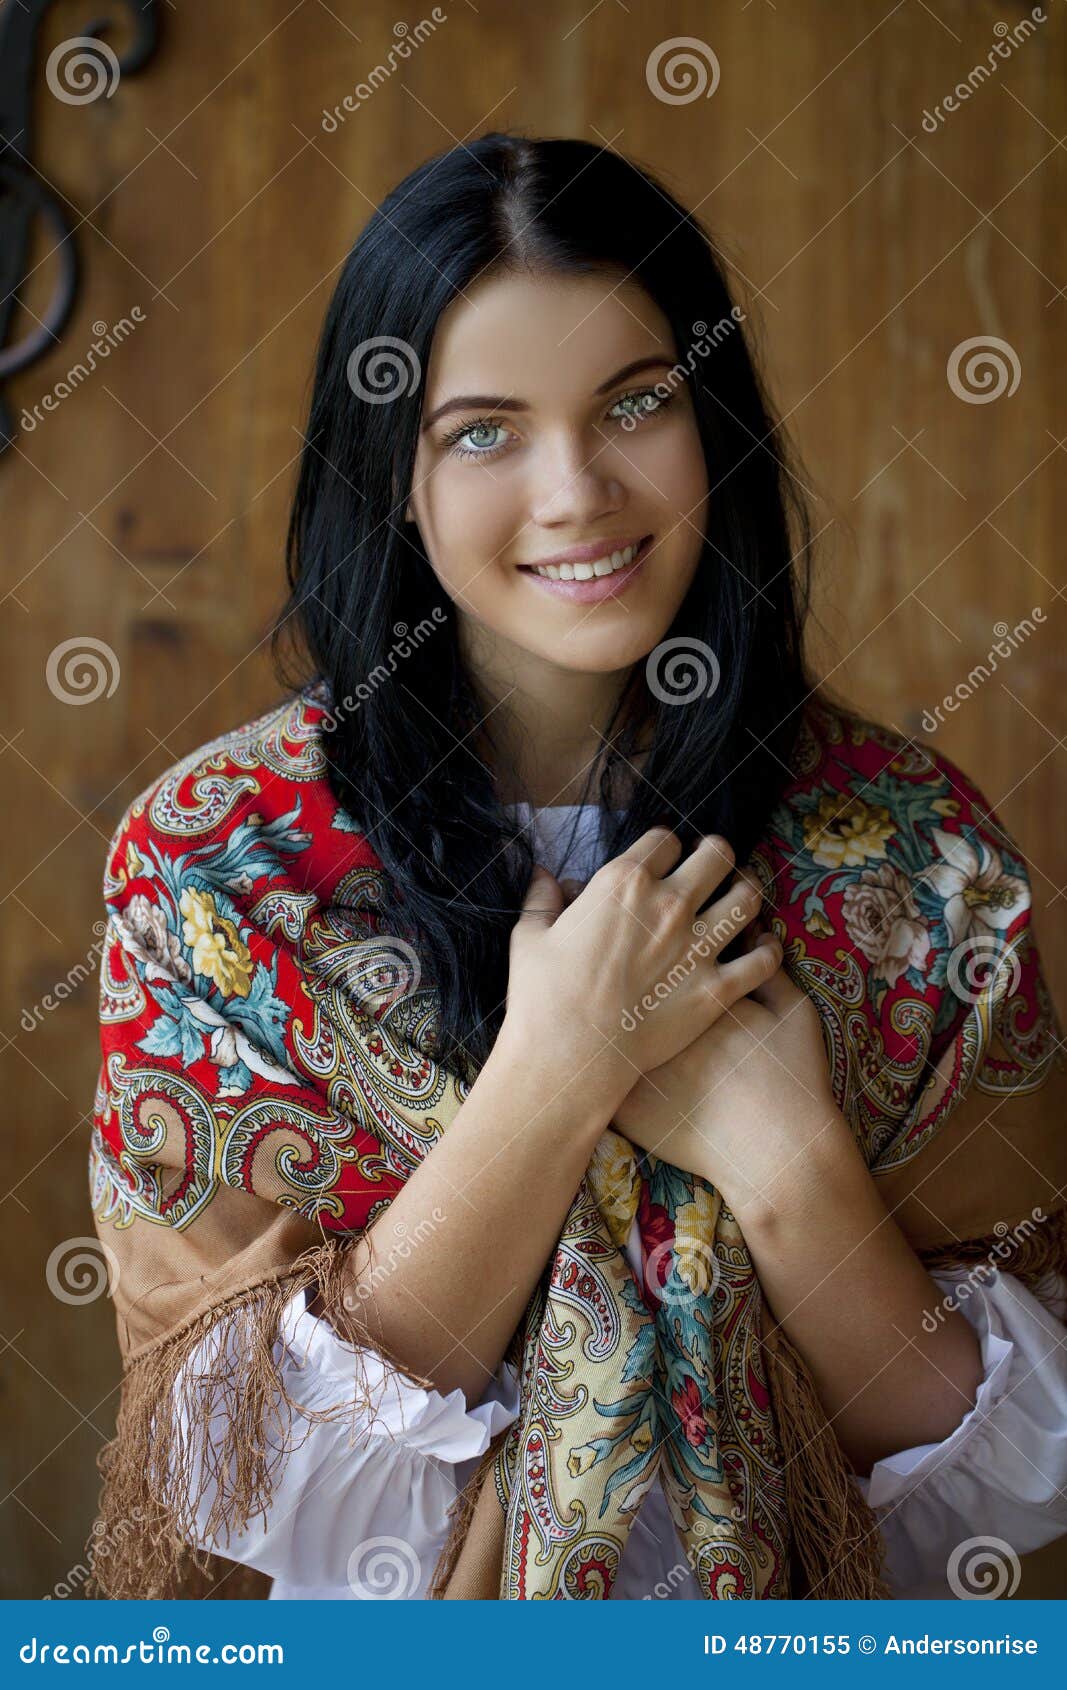 Beauty Woman In The National Patterned Scarf Stock Image Image Of Girl Folk 48770155